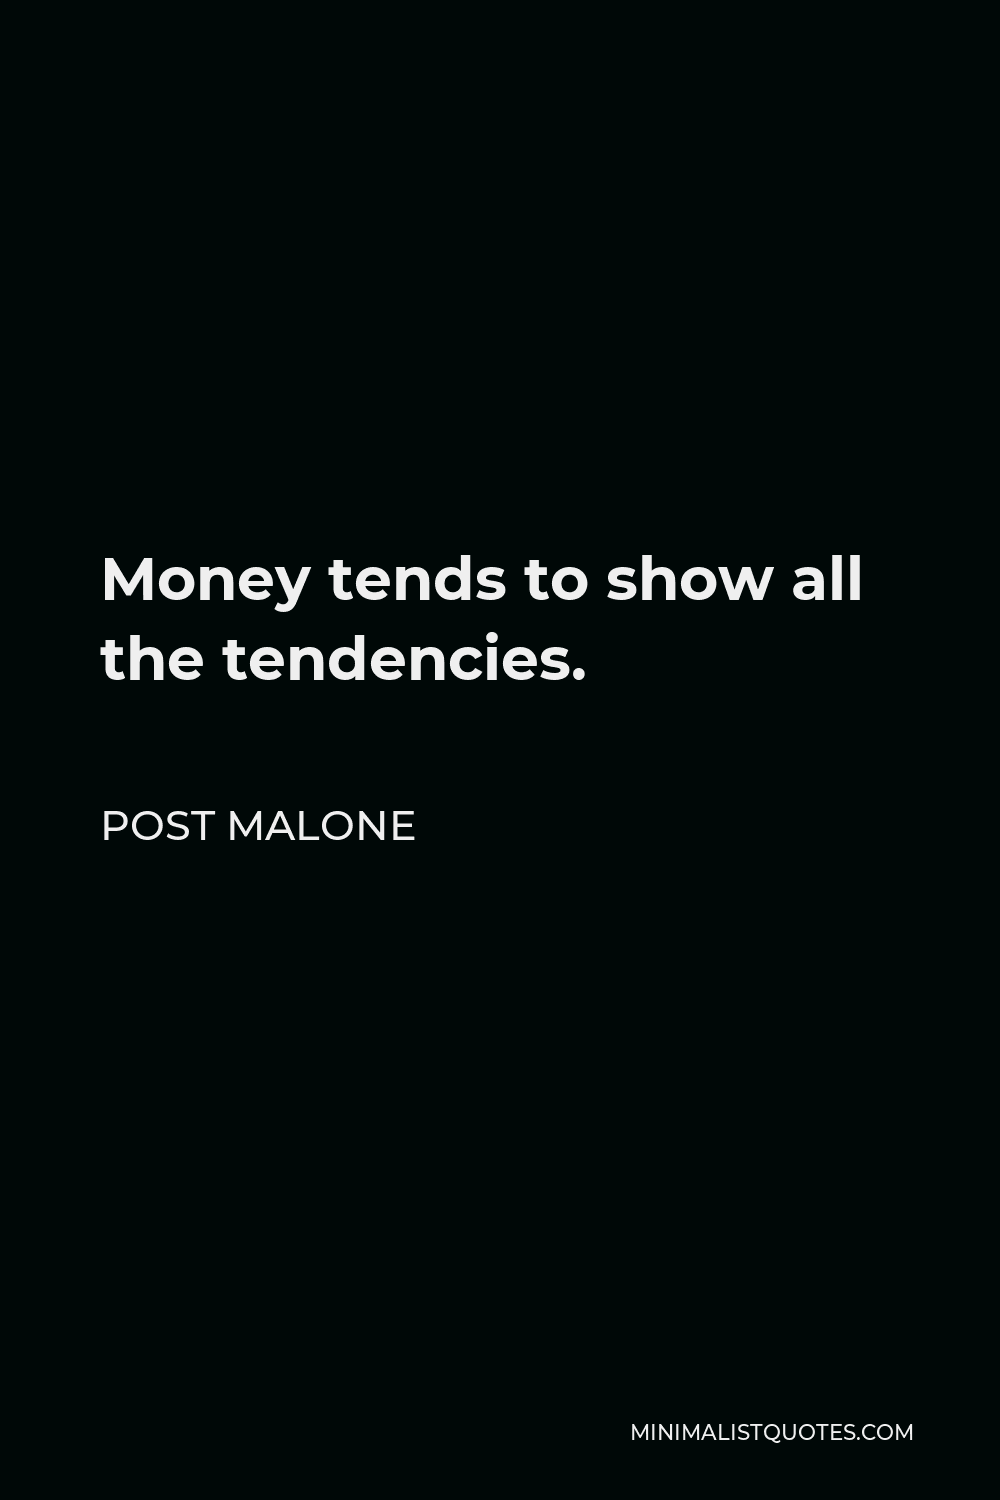 Post Malone Quote - Money tends to show all the tendencies.